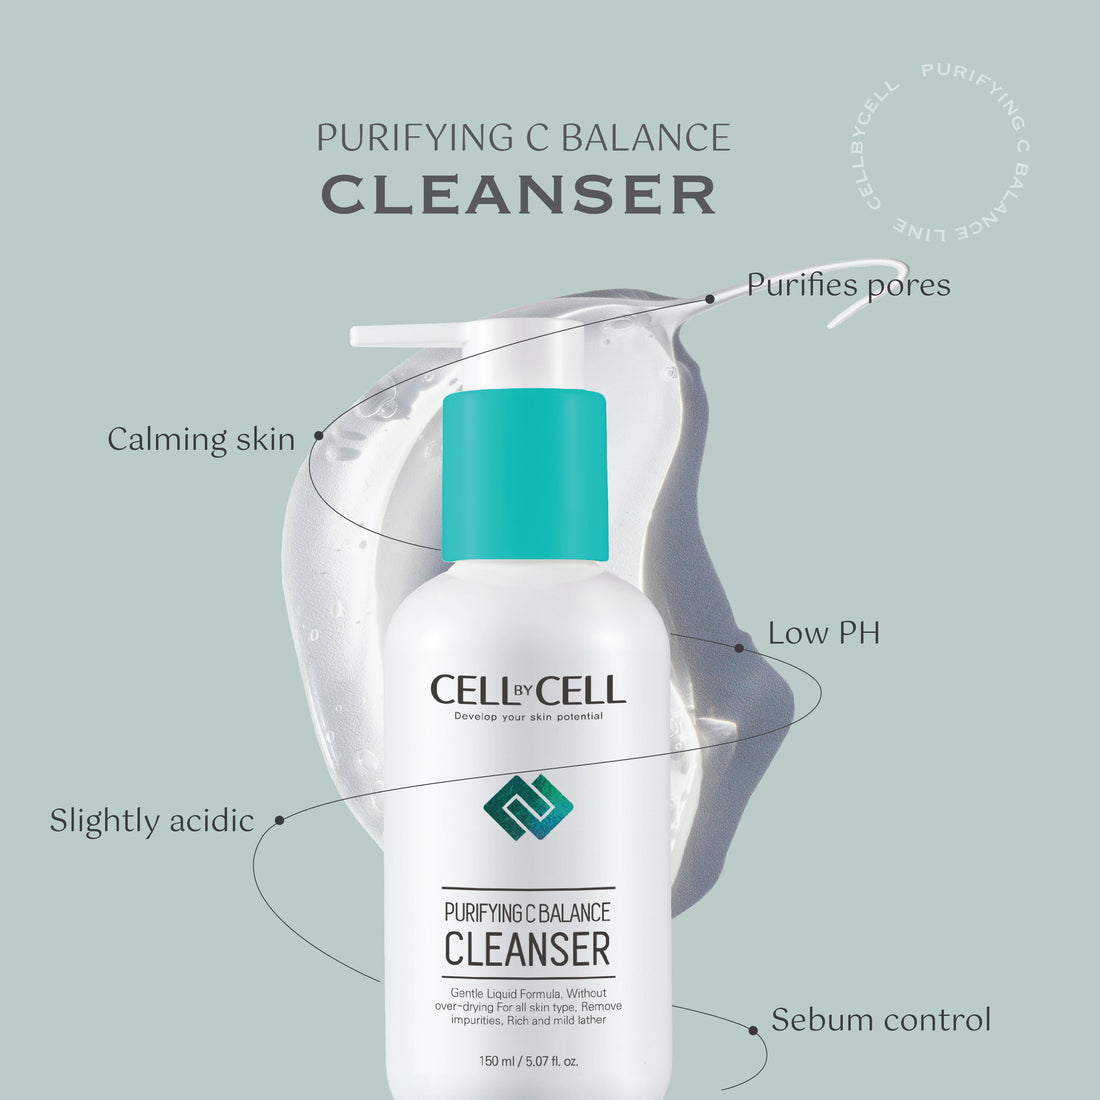 Purifying C Balance Cleanser